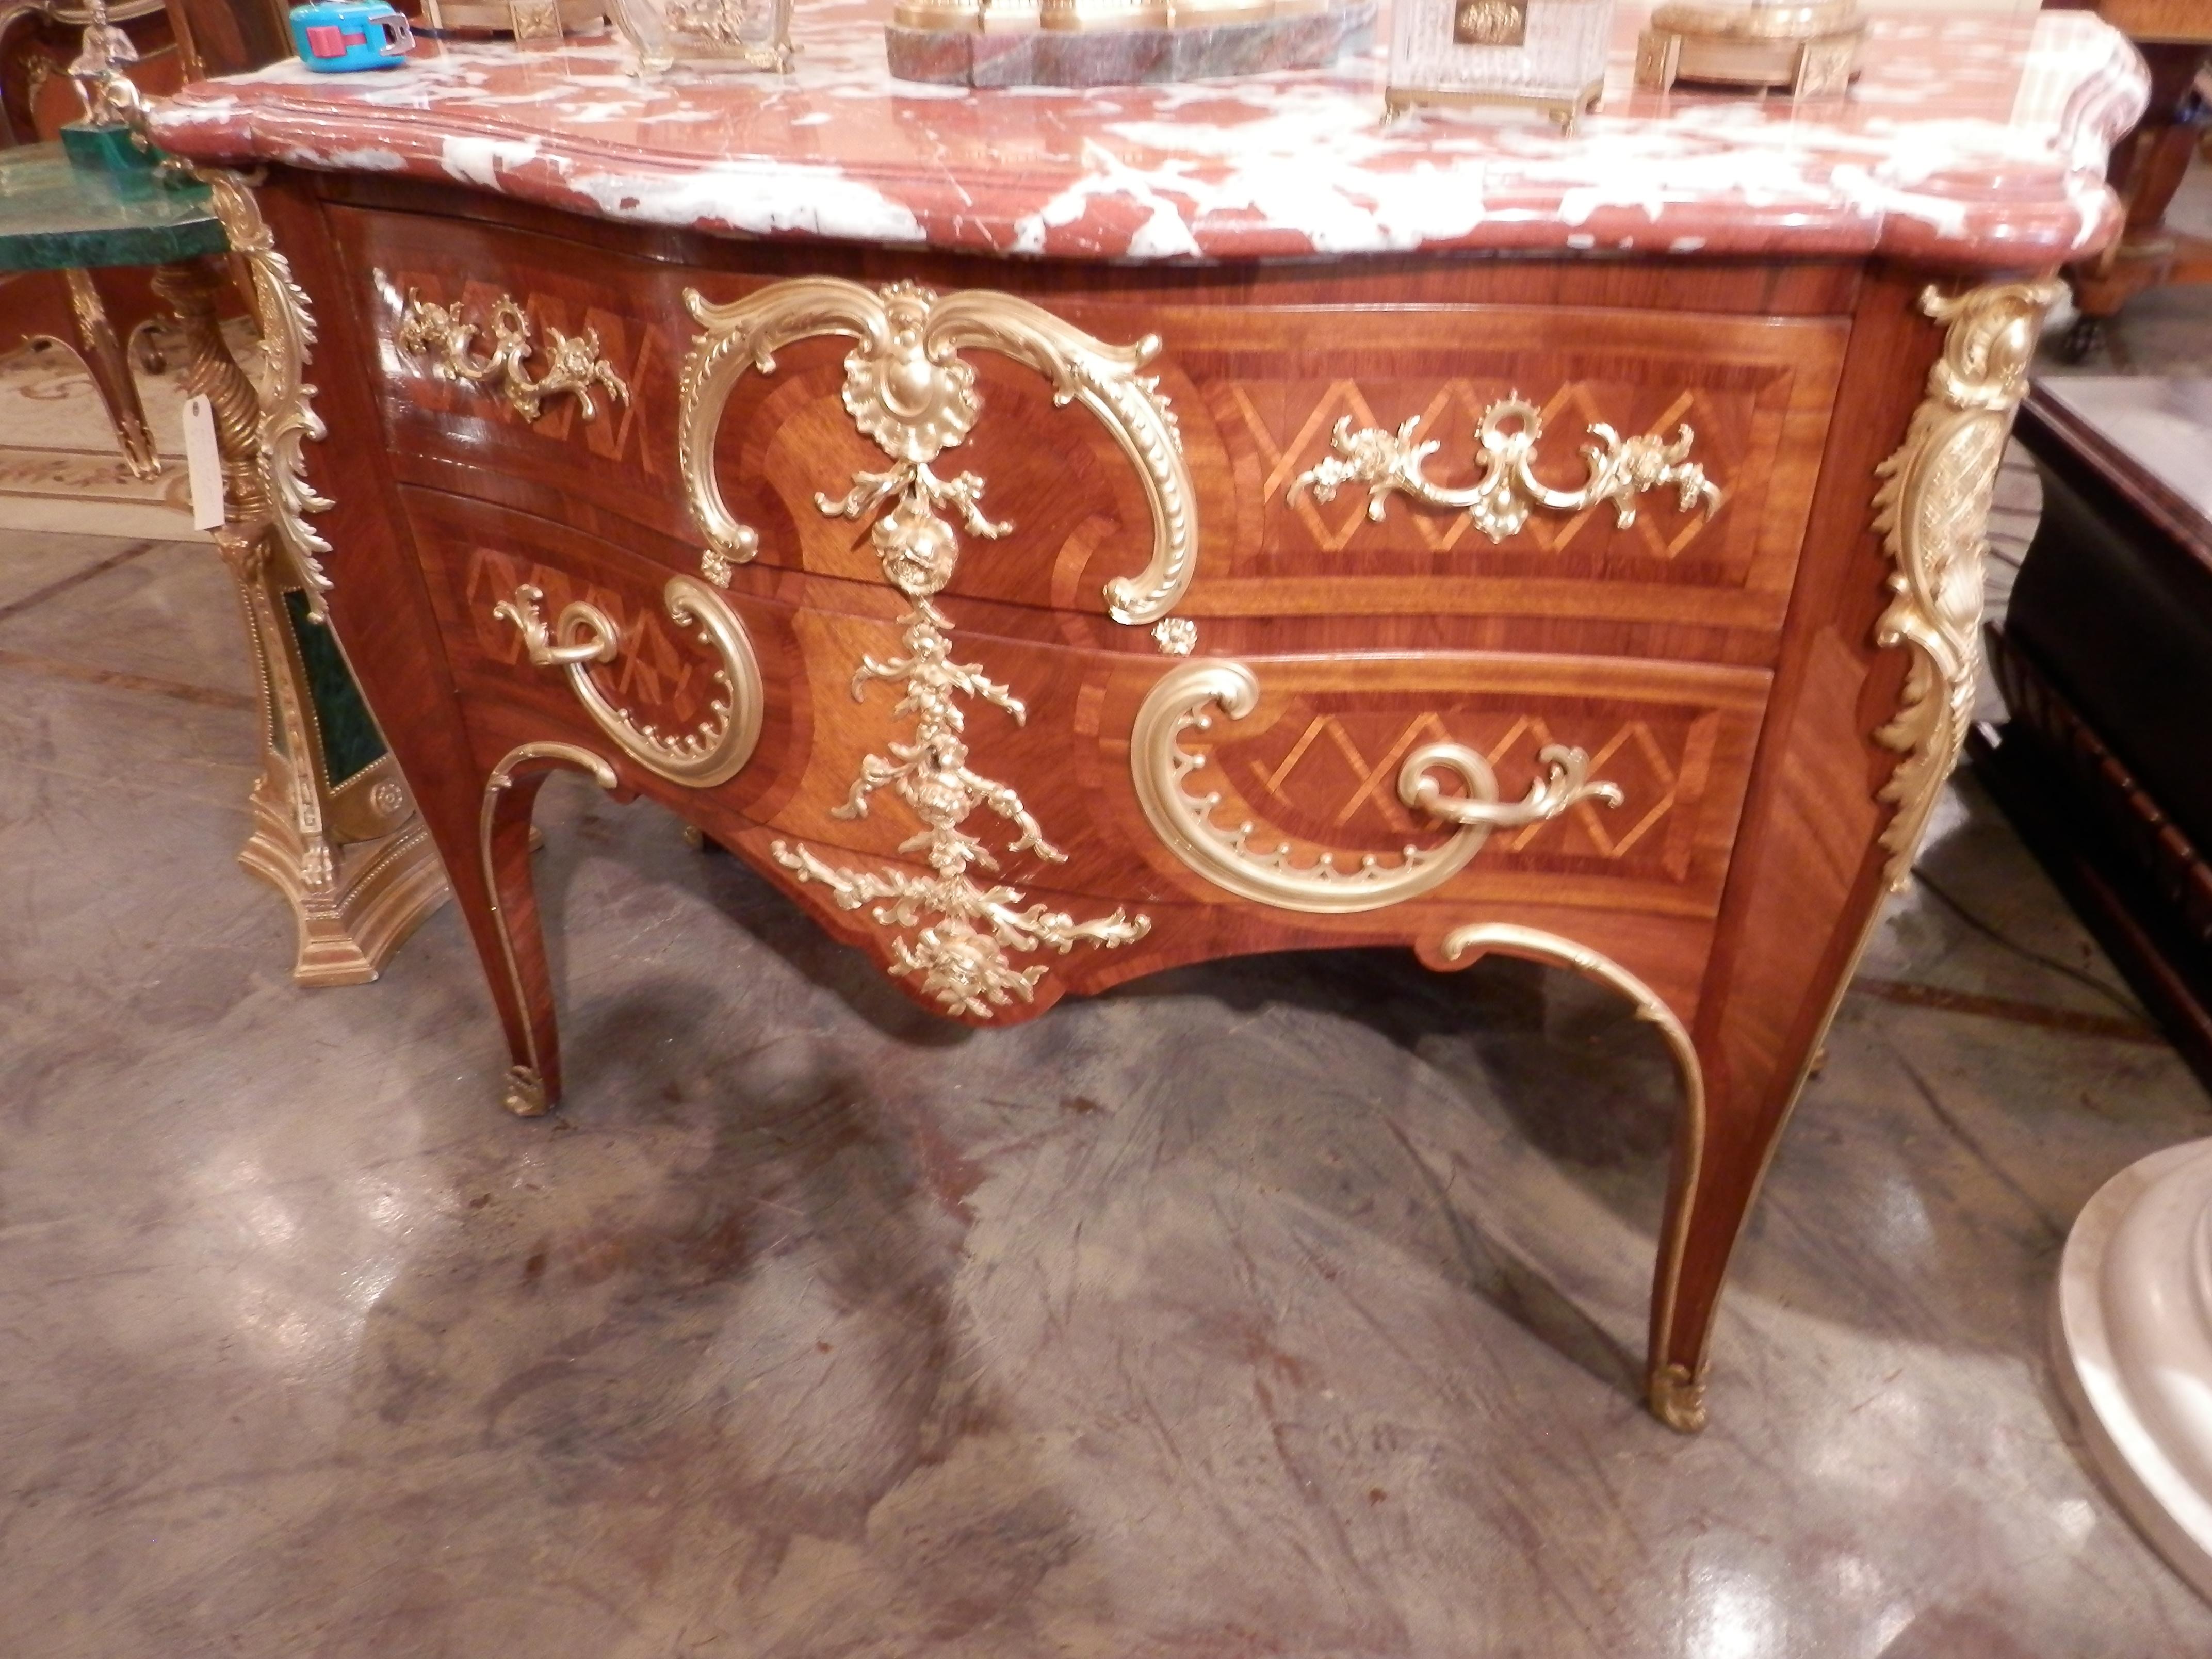 Fantastic quality French 19th century Louis XV parquetry and gilt bronze marble top commode stamped Durand.